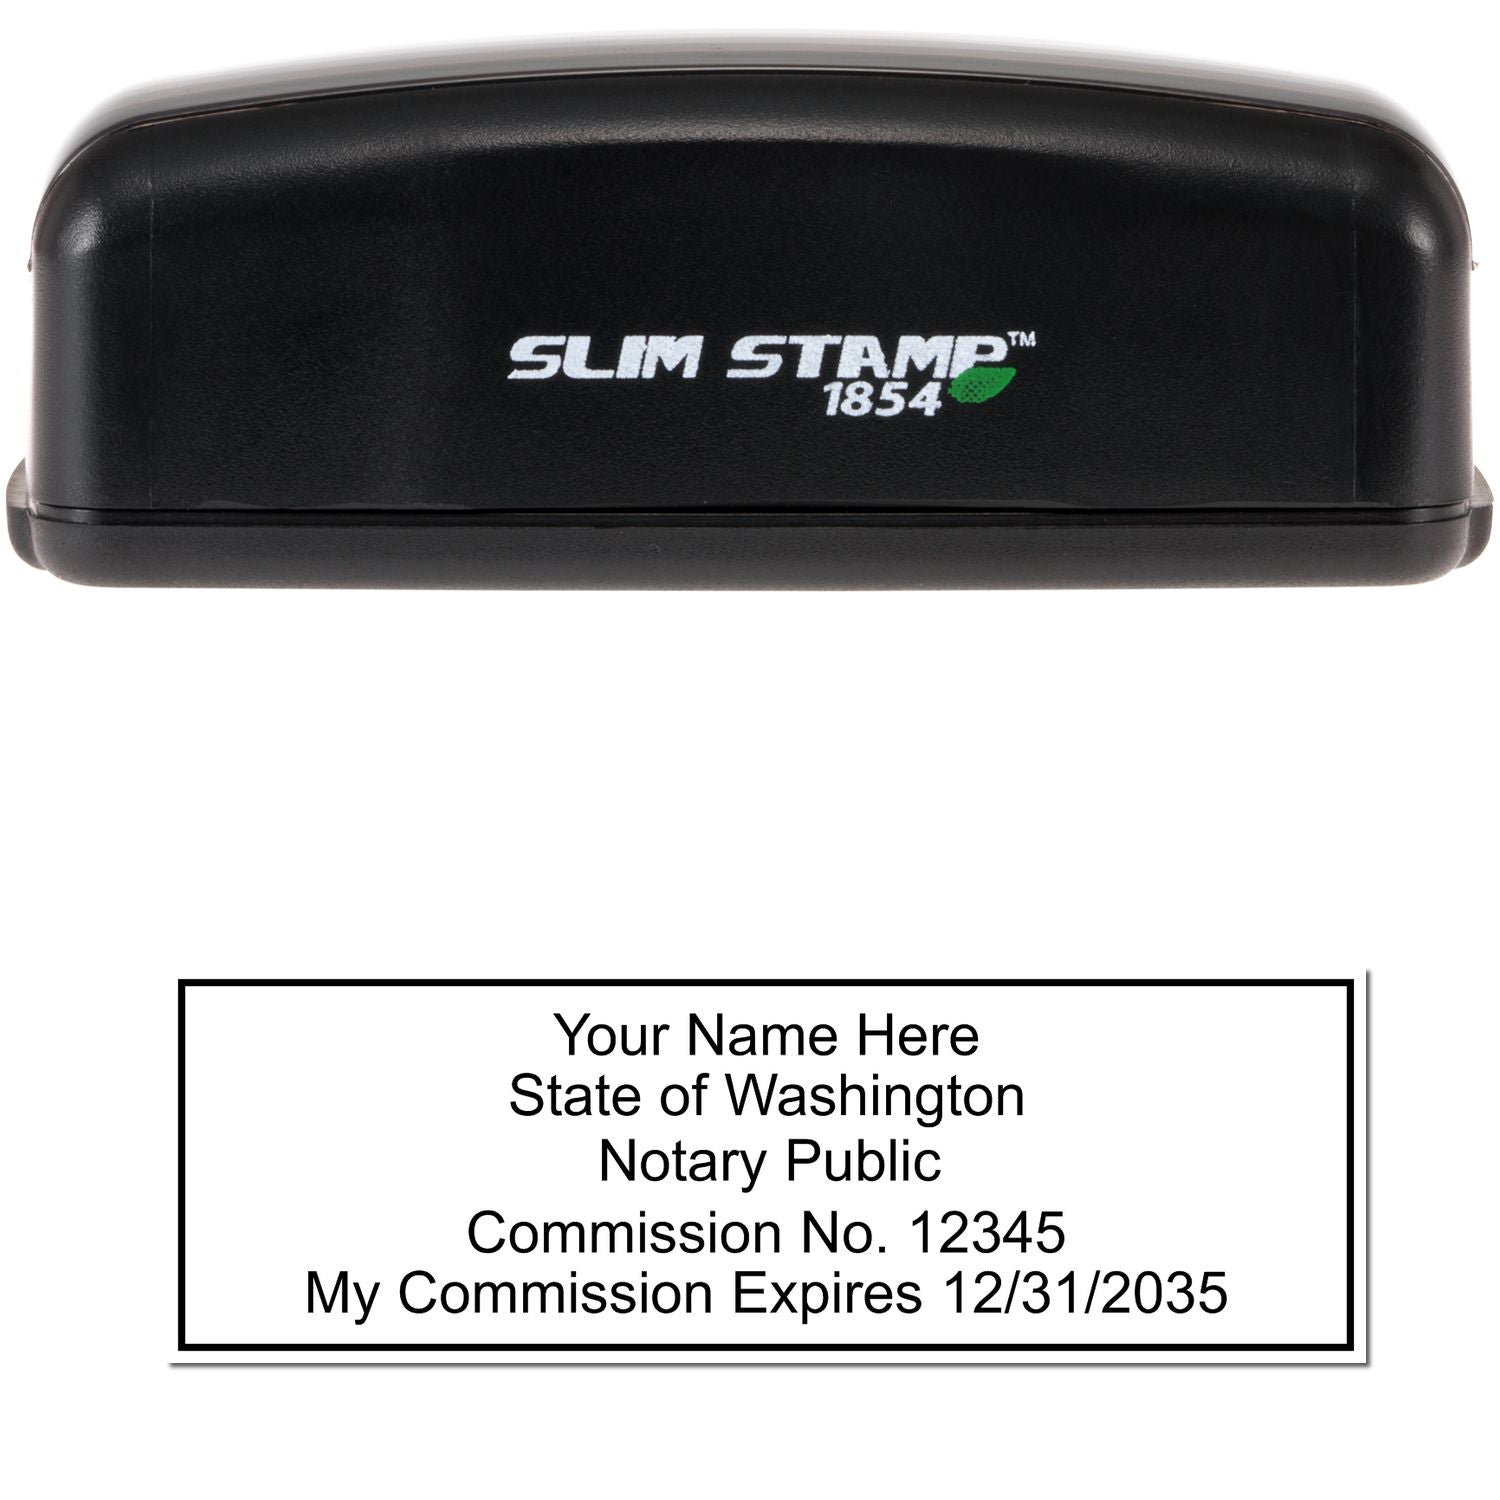 The main image for the Slim Pre-Inked Rectangular Notary Stamp for Washington depicting a sample of the imprint and electronic files